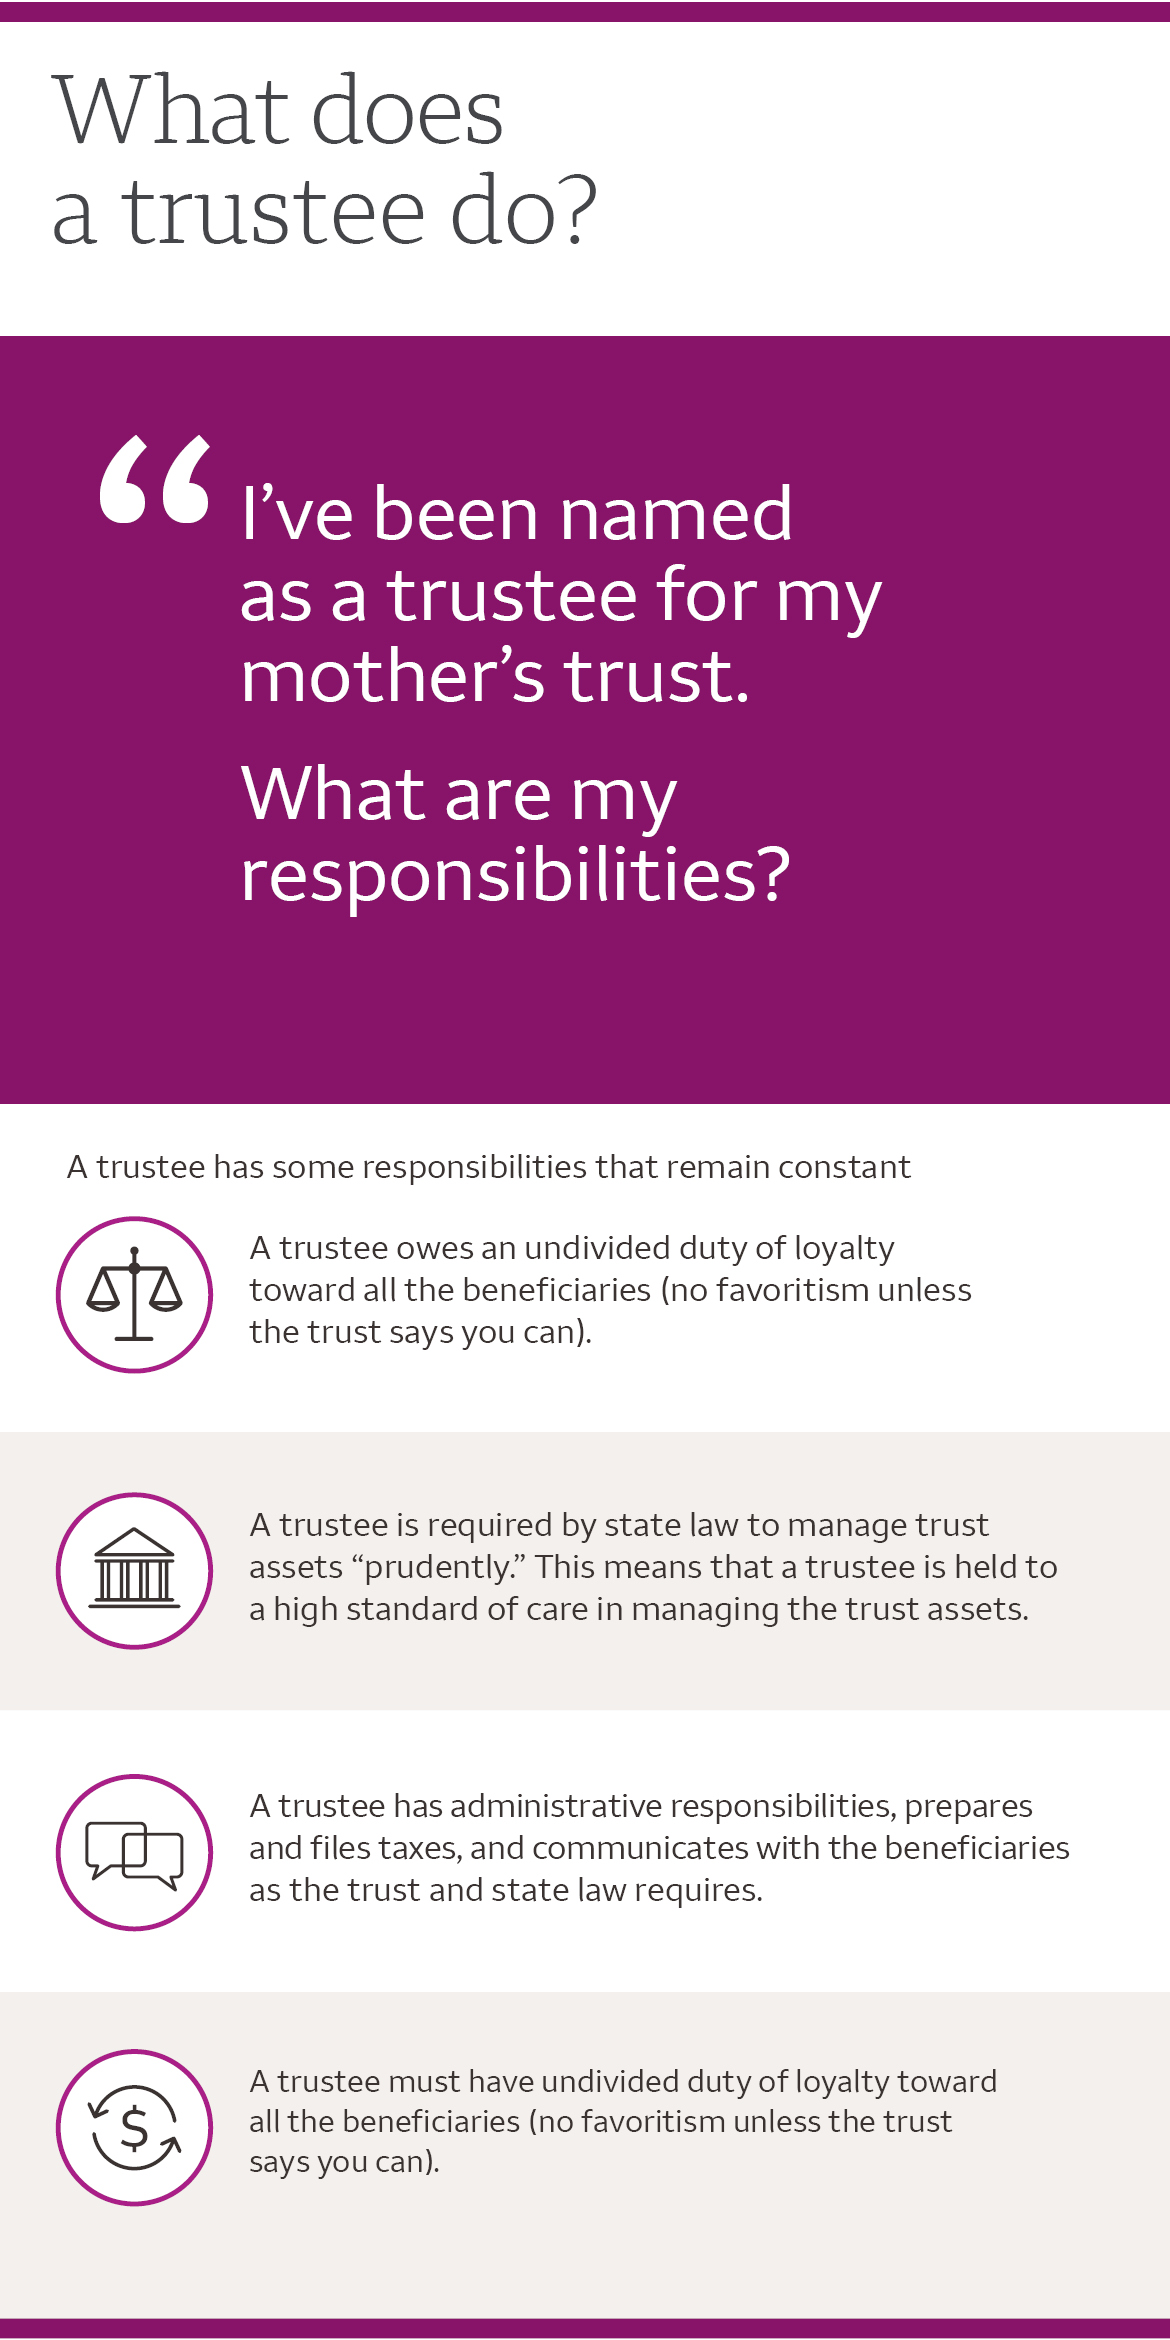 Infographic outlining what a trustee does. For details, click "view text alternative."